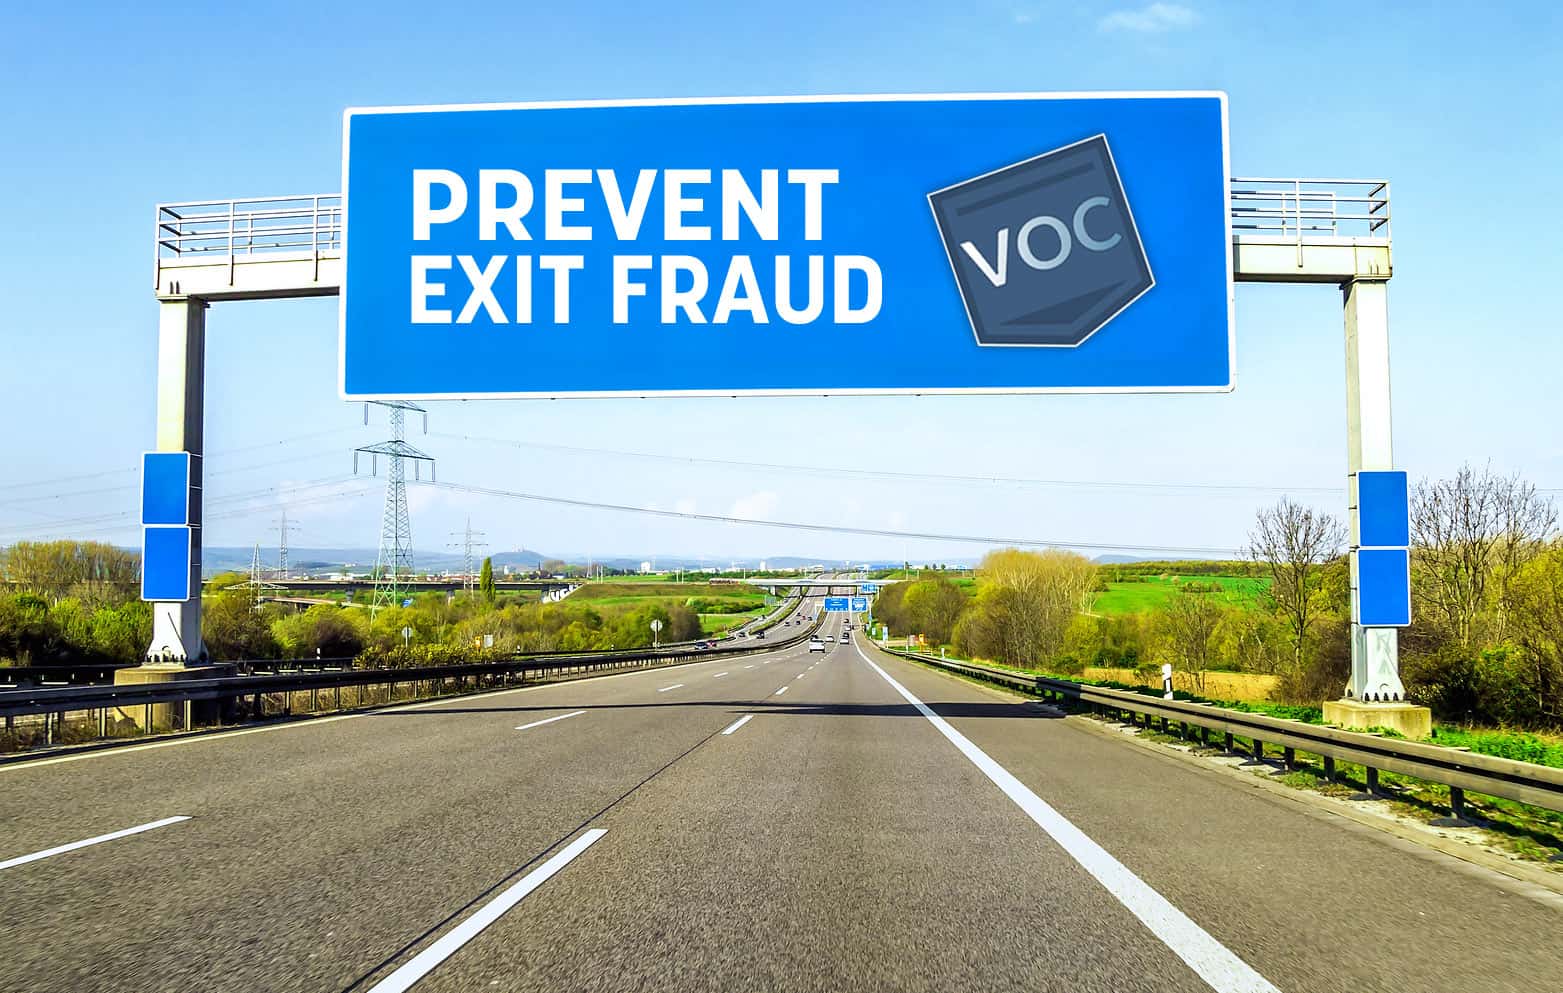 highway-sign-captioning-prevent-timeshare-exit-fraud-with-vacation-ownership-consultants